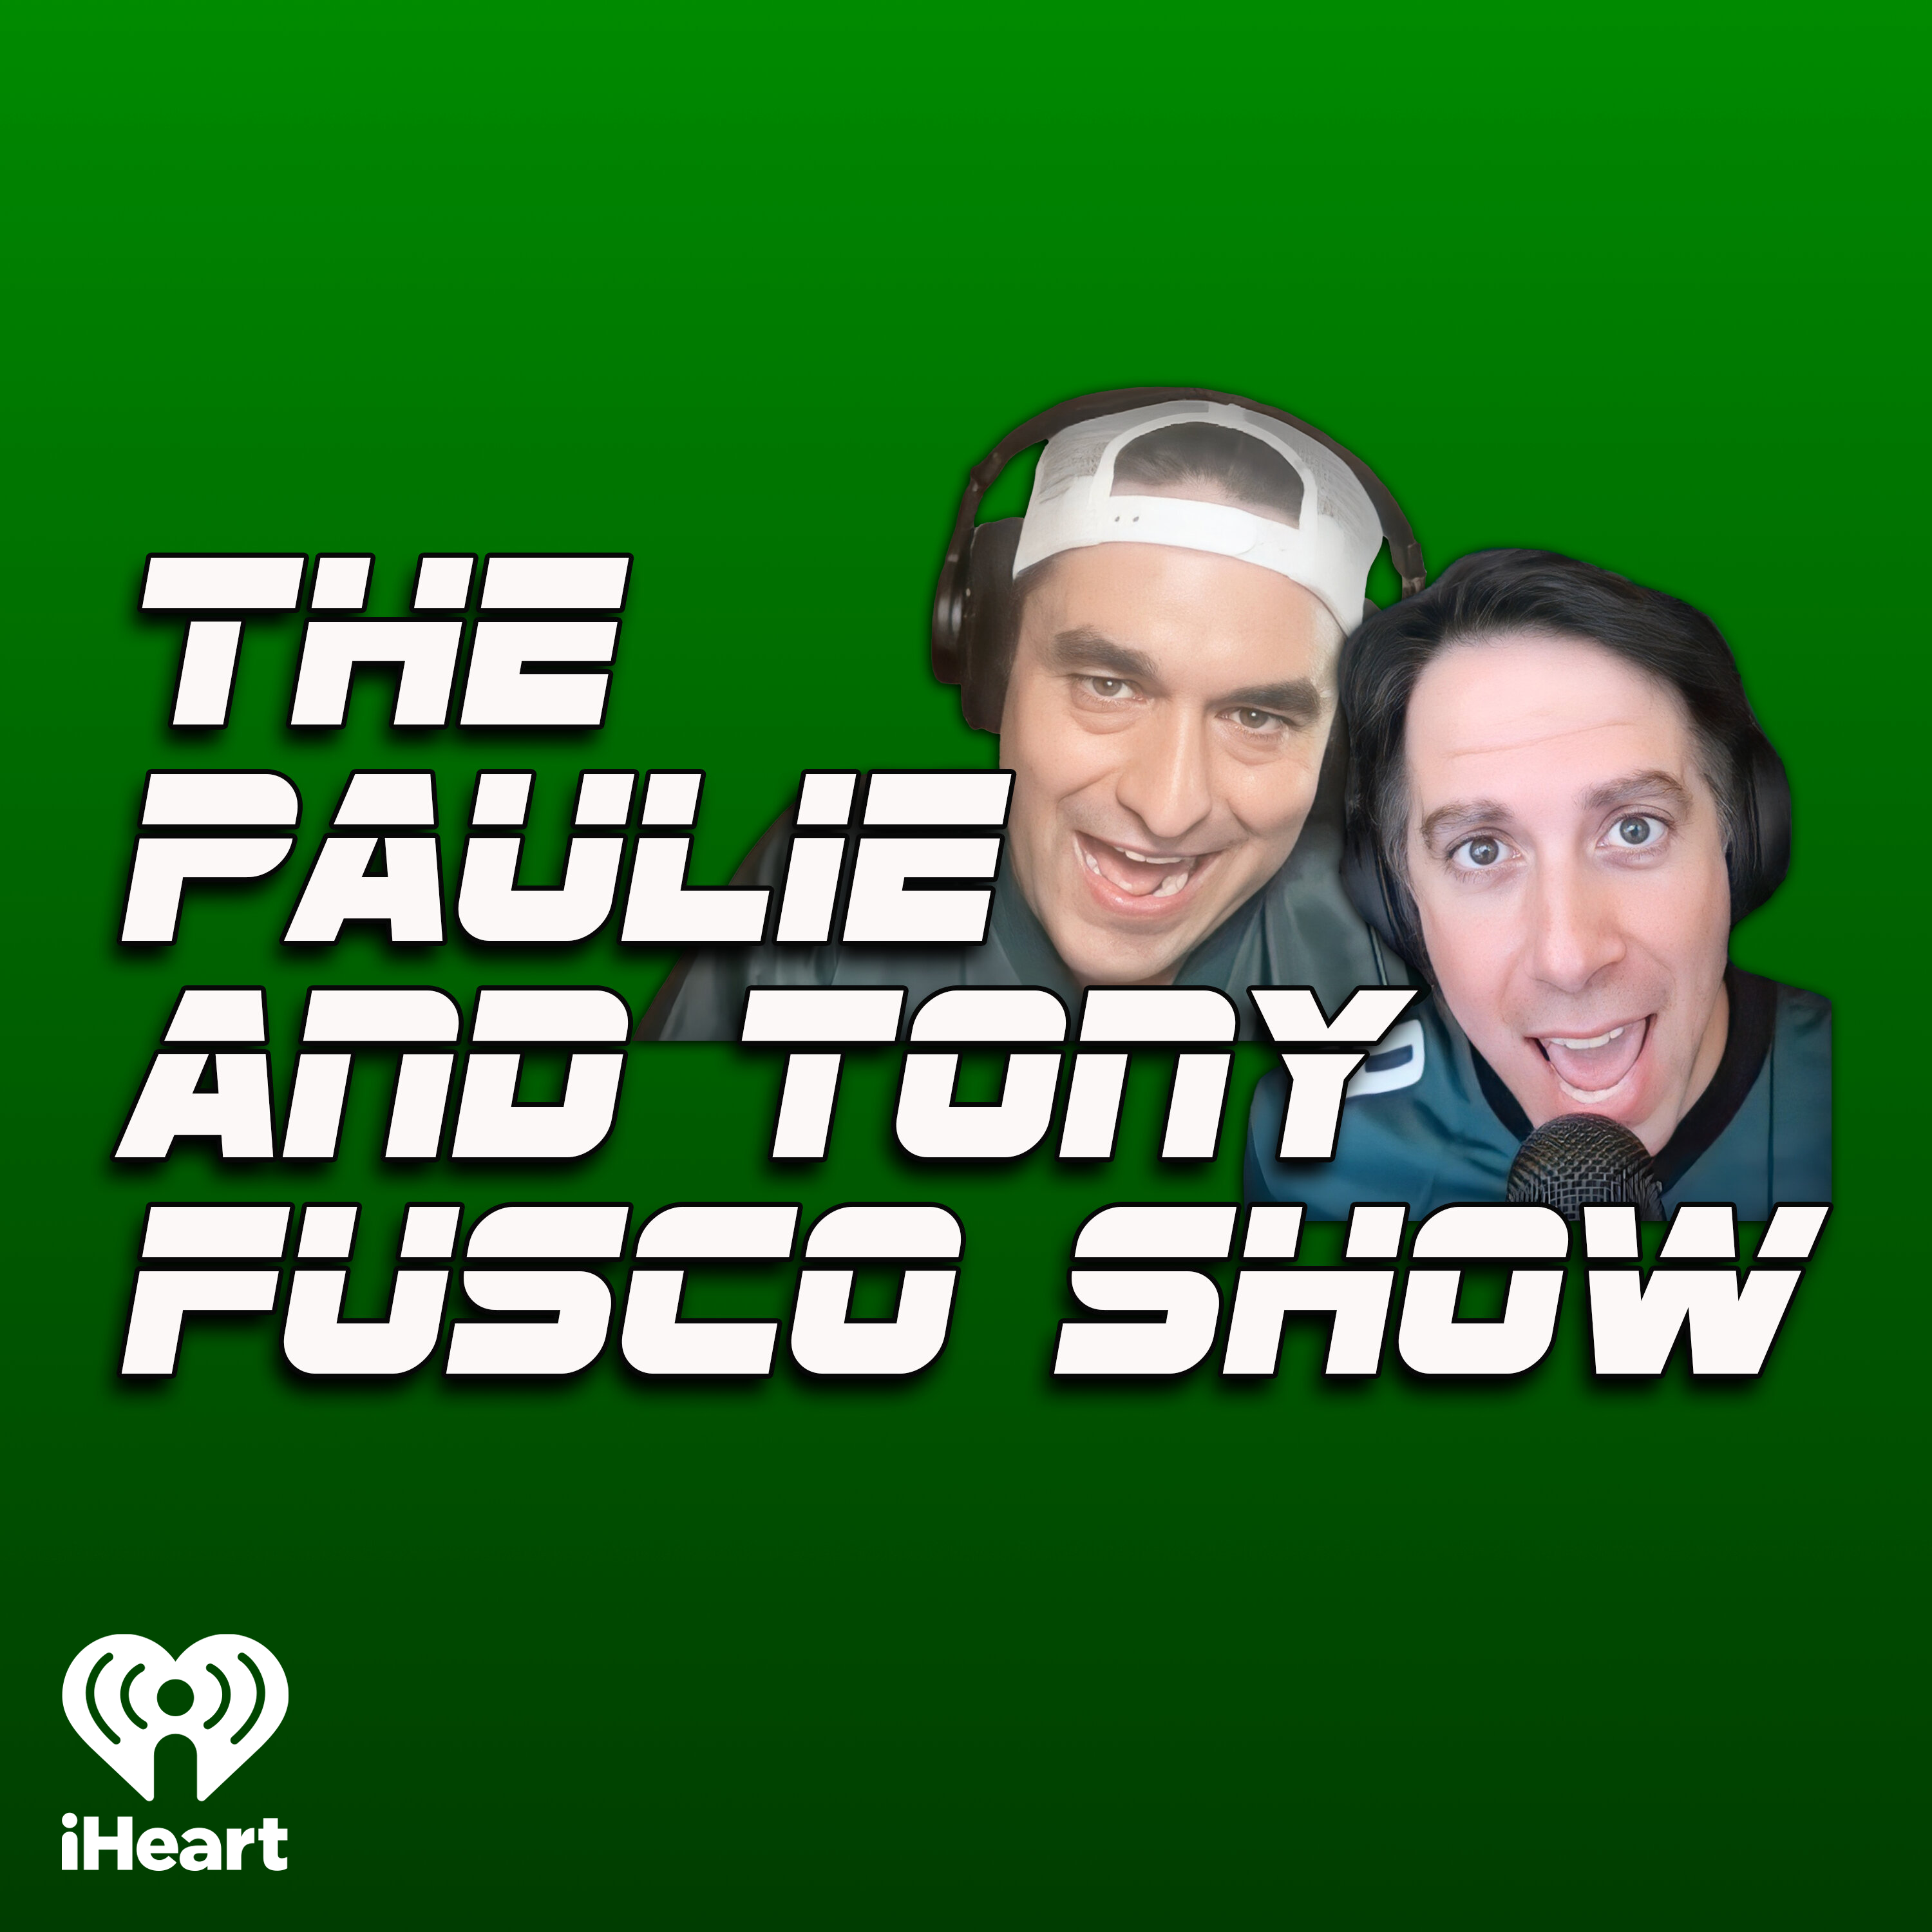 The Paulie & Tony Fusco Show: Cuttino Mobley gets KICKED OFF SHOW, Ja Morant UNFAIRLY attacked, Doc Rivers STINKS